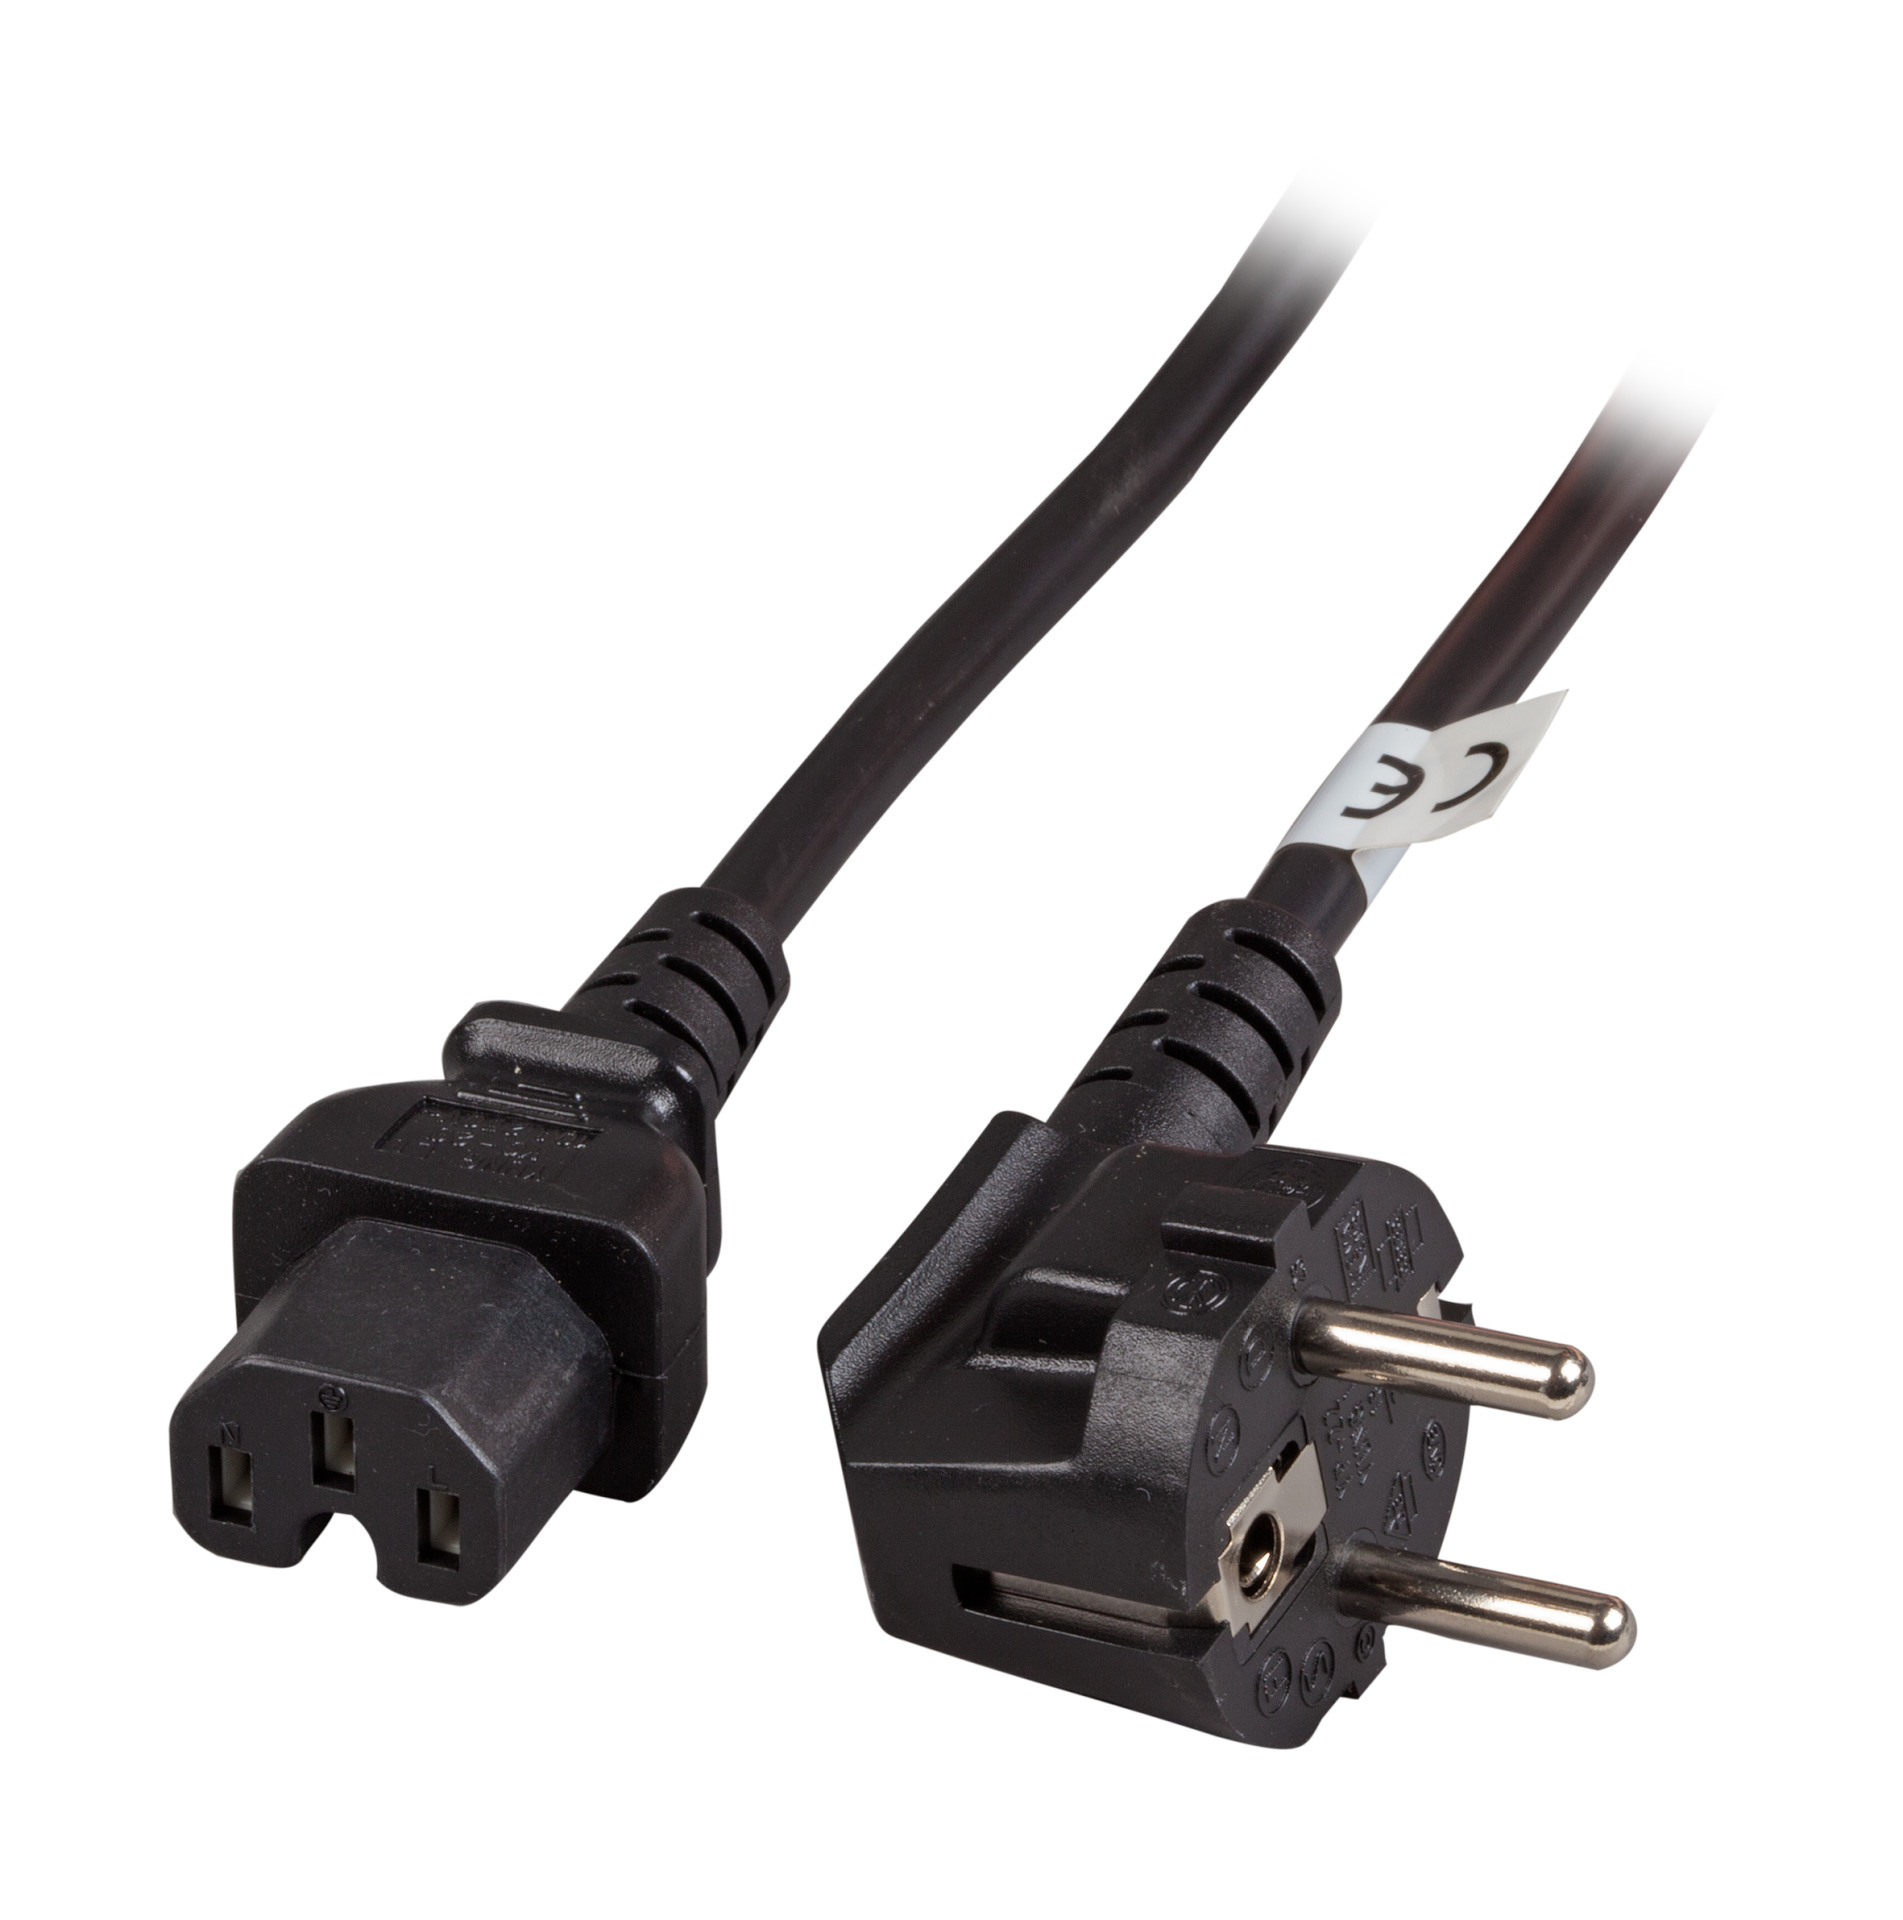 Warm Device Cable CEE 7/7 90° to C15, Black, 2 m, 3 x 1.00 mm²